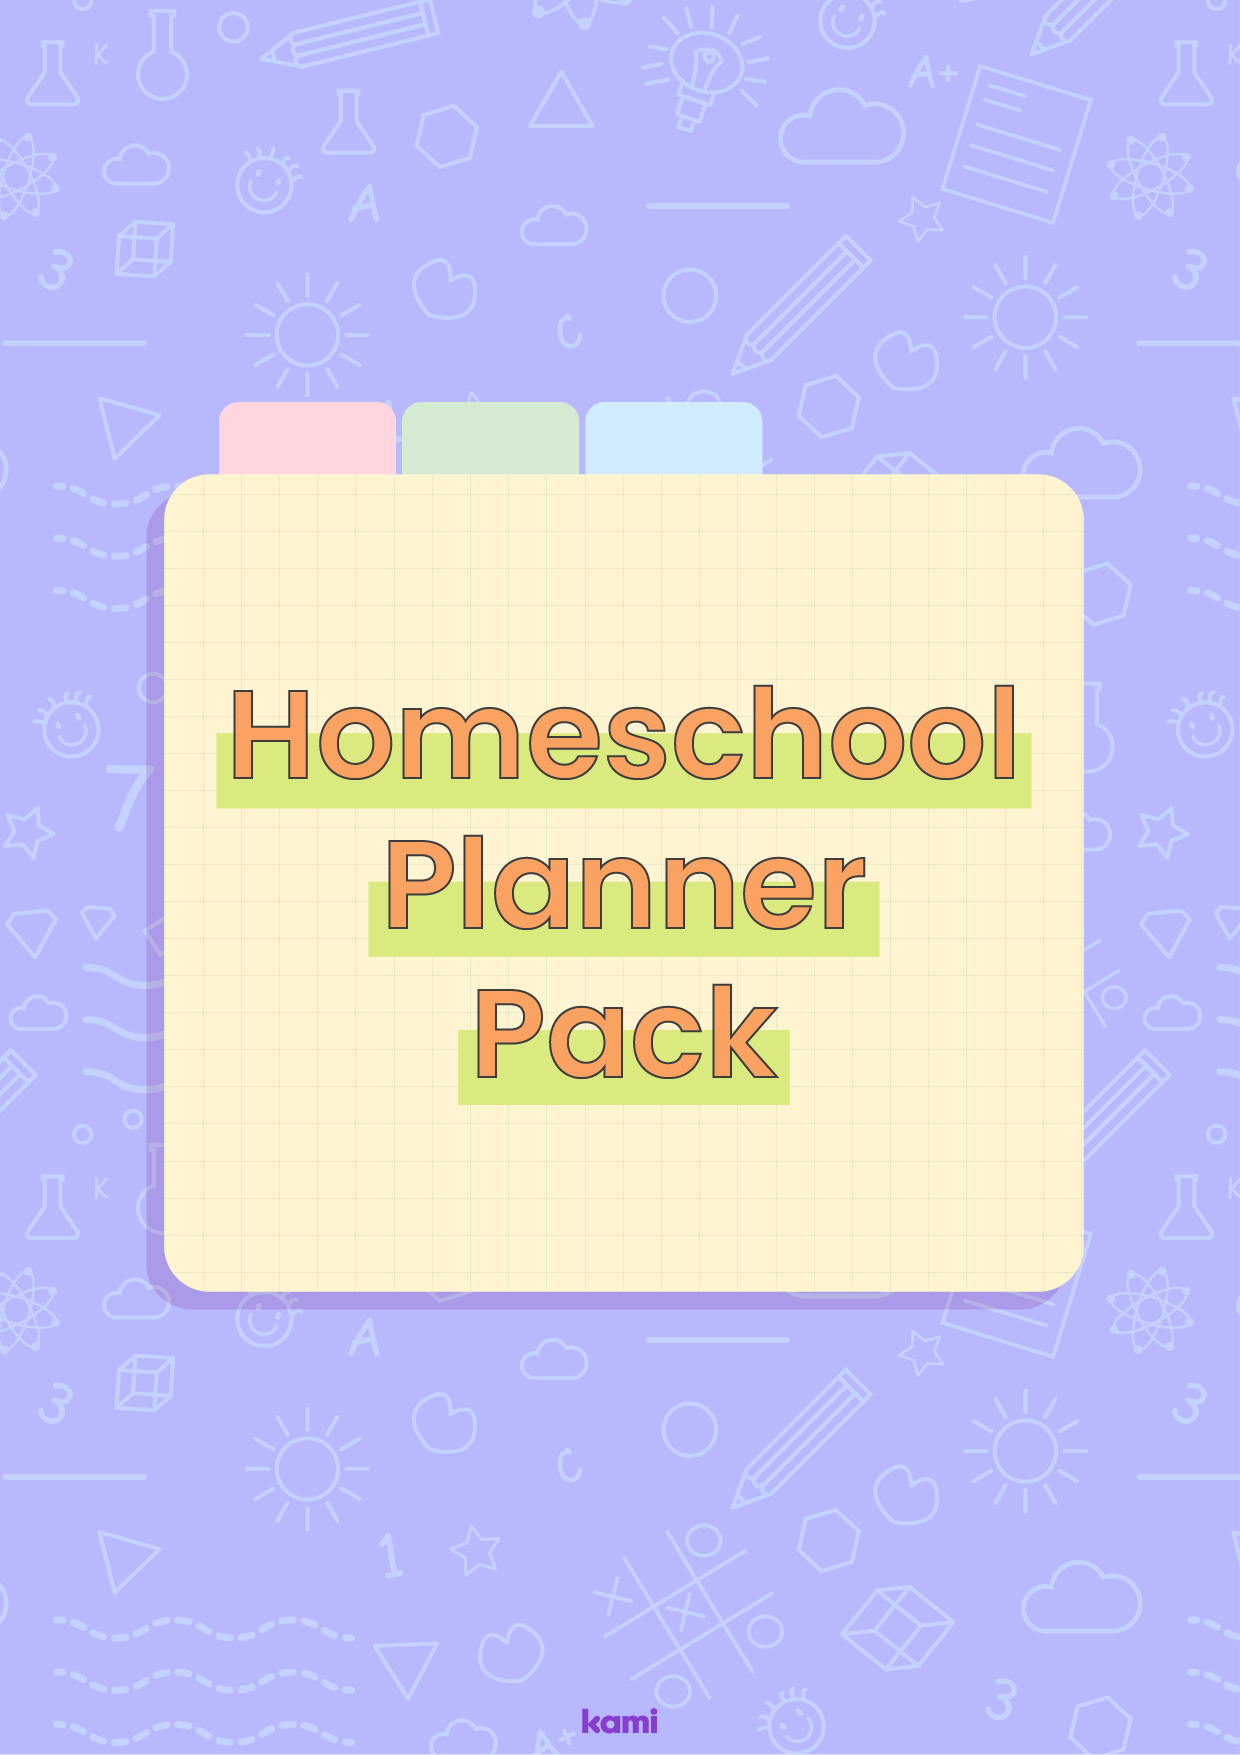 A homeschool planner pack for homeschooling with a doodles design